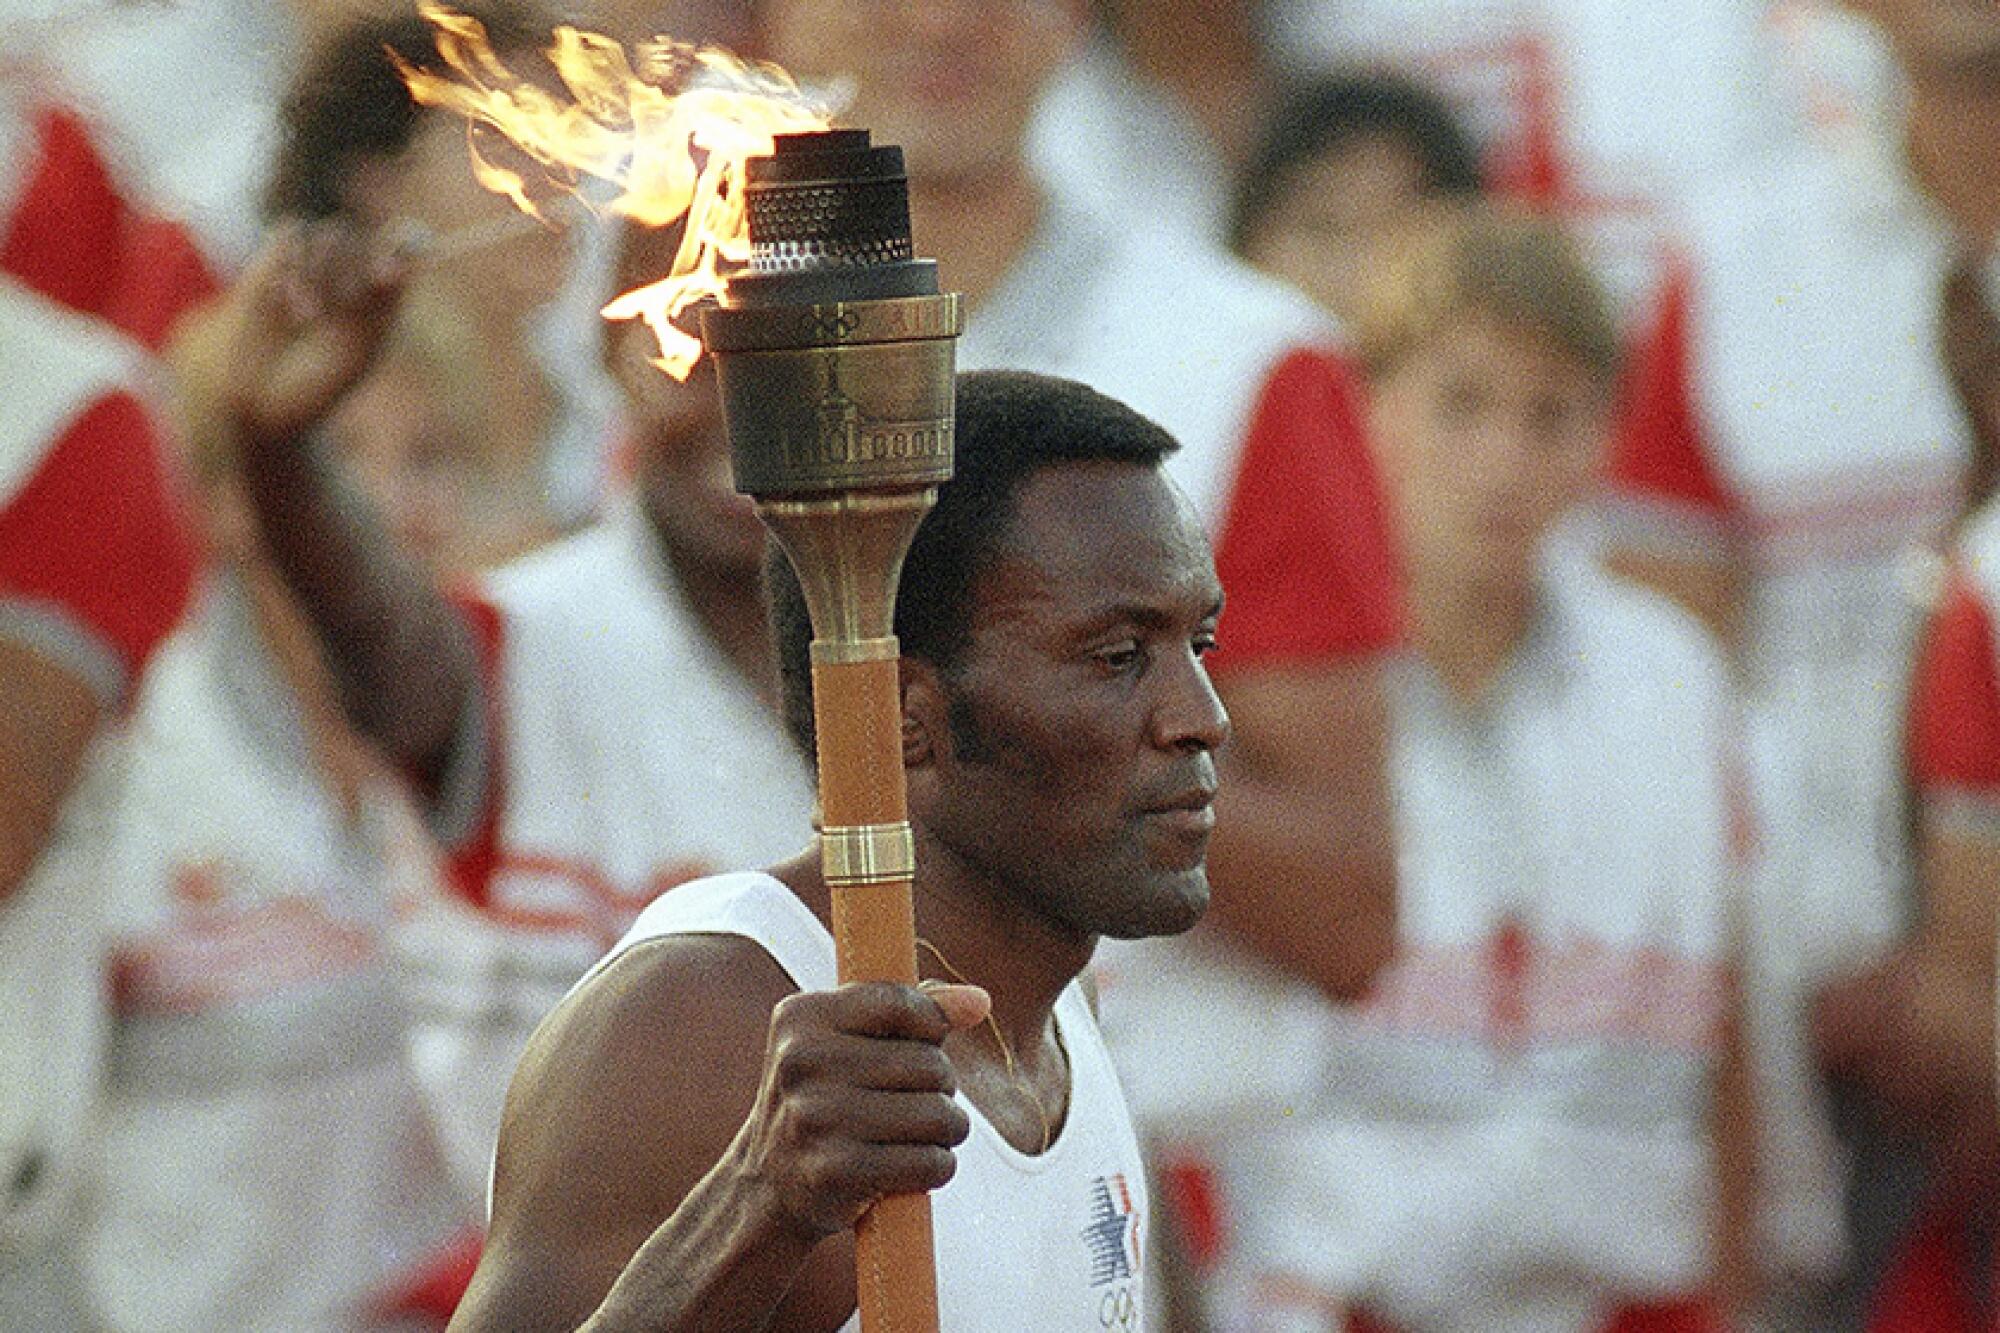 Rafer Johnson carries the Olympic torch through the Los Angeles Memorial Coliseum in 1984.